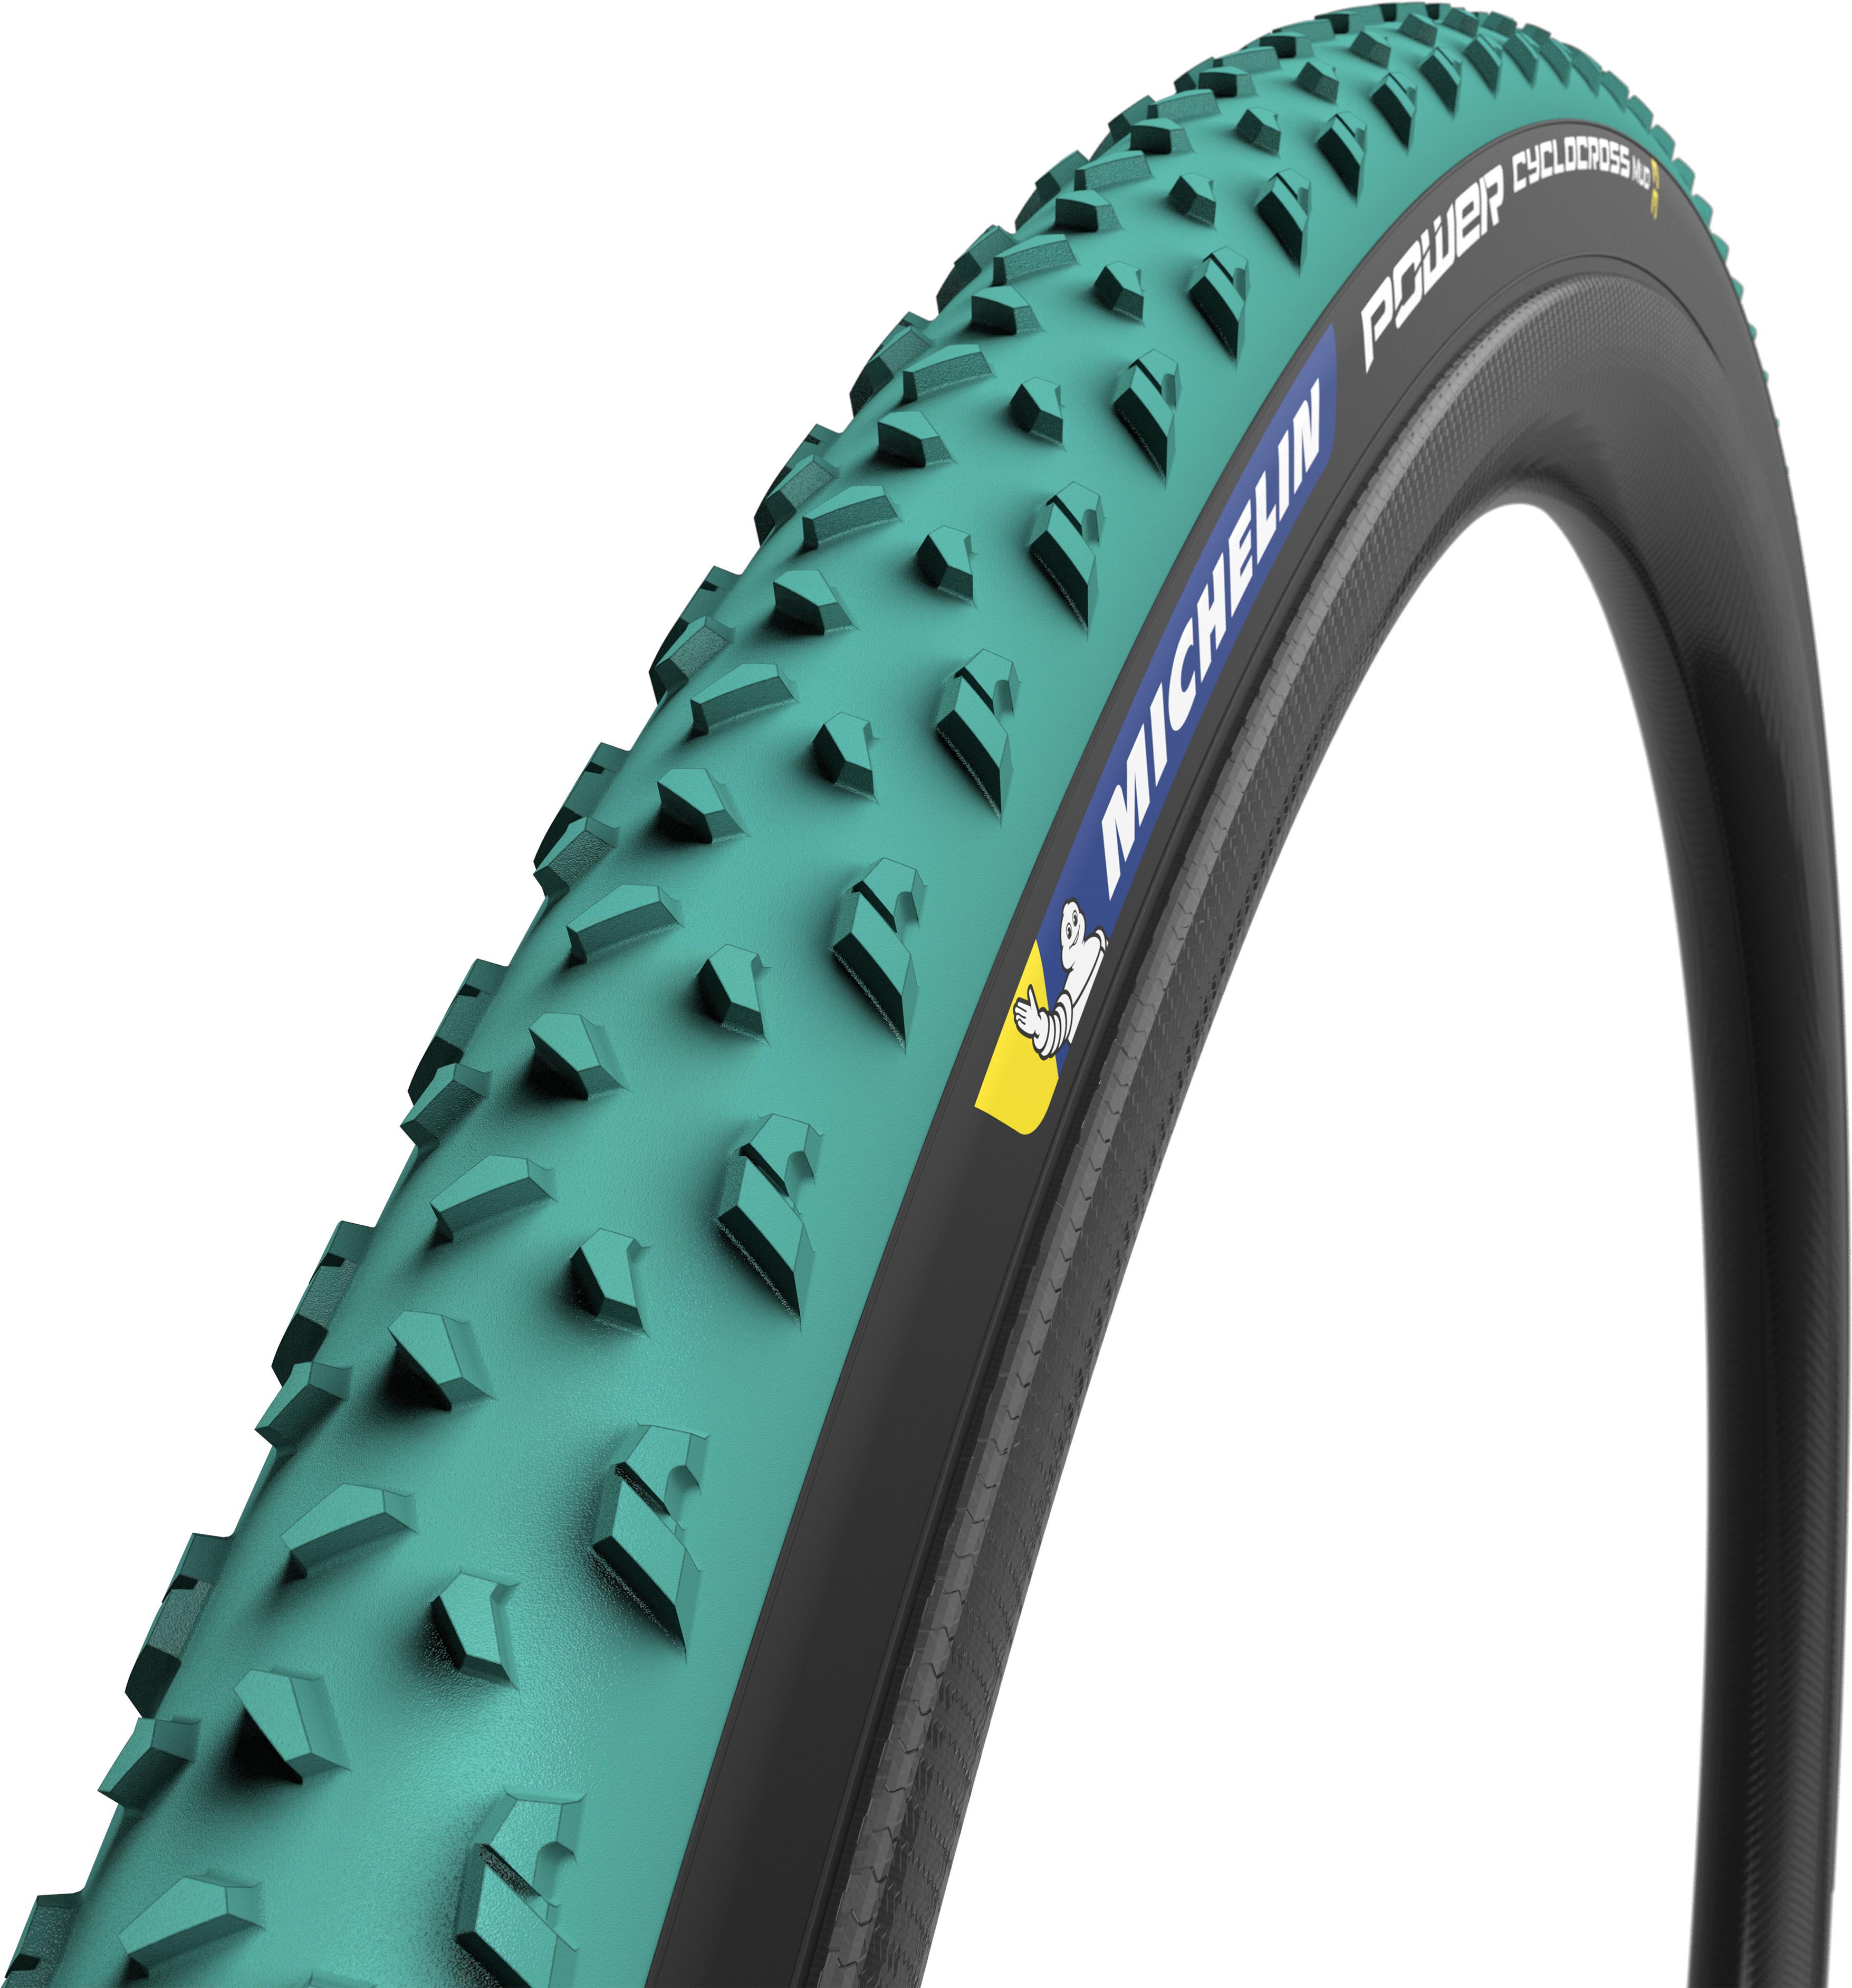 Michelin Power Cyclocross Mud Tubeless Tyre (tlr - Ts) - Black/green